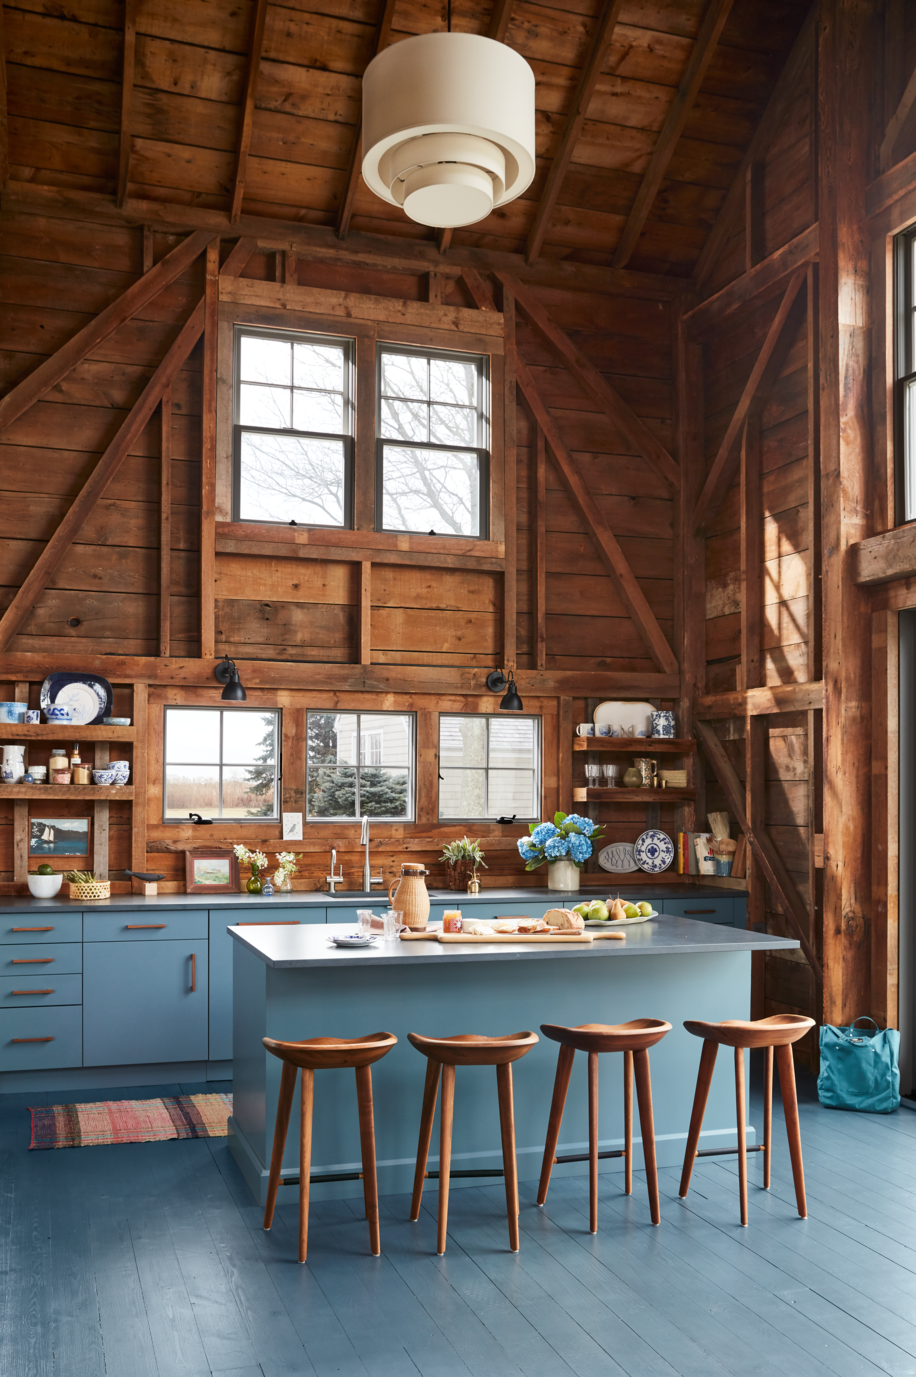 blue gray kitchen island with refrigerator drawers in rustic space with natural wood walls and vaulted ceiling